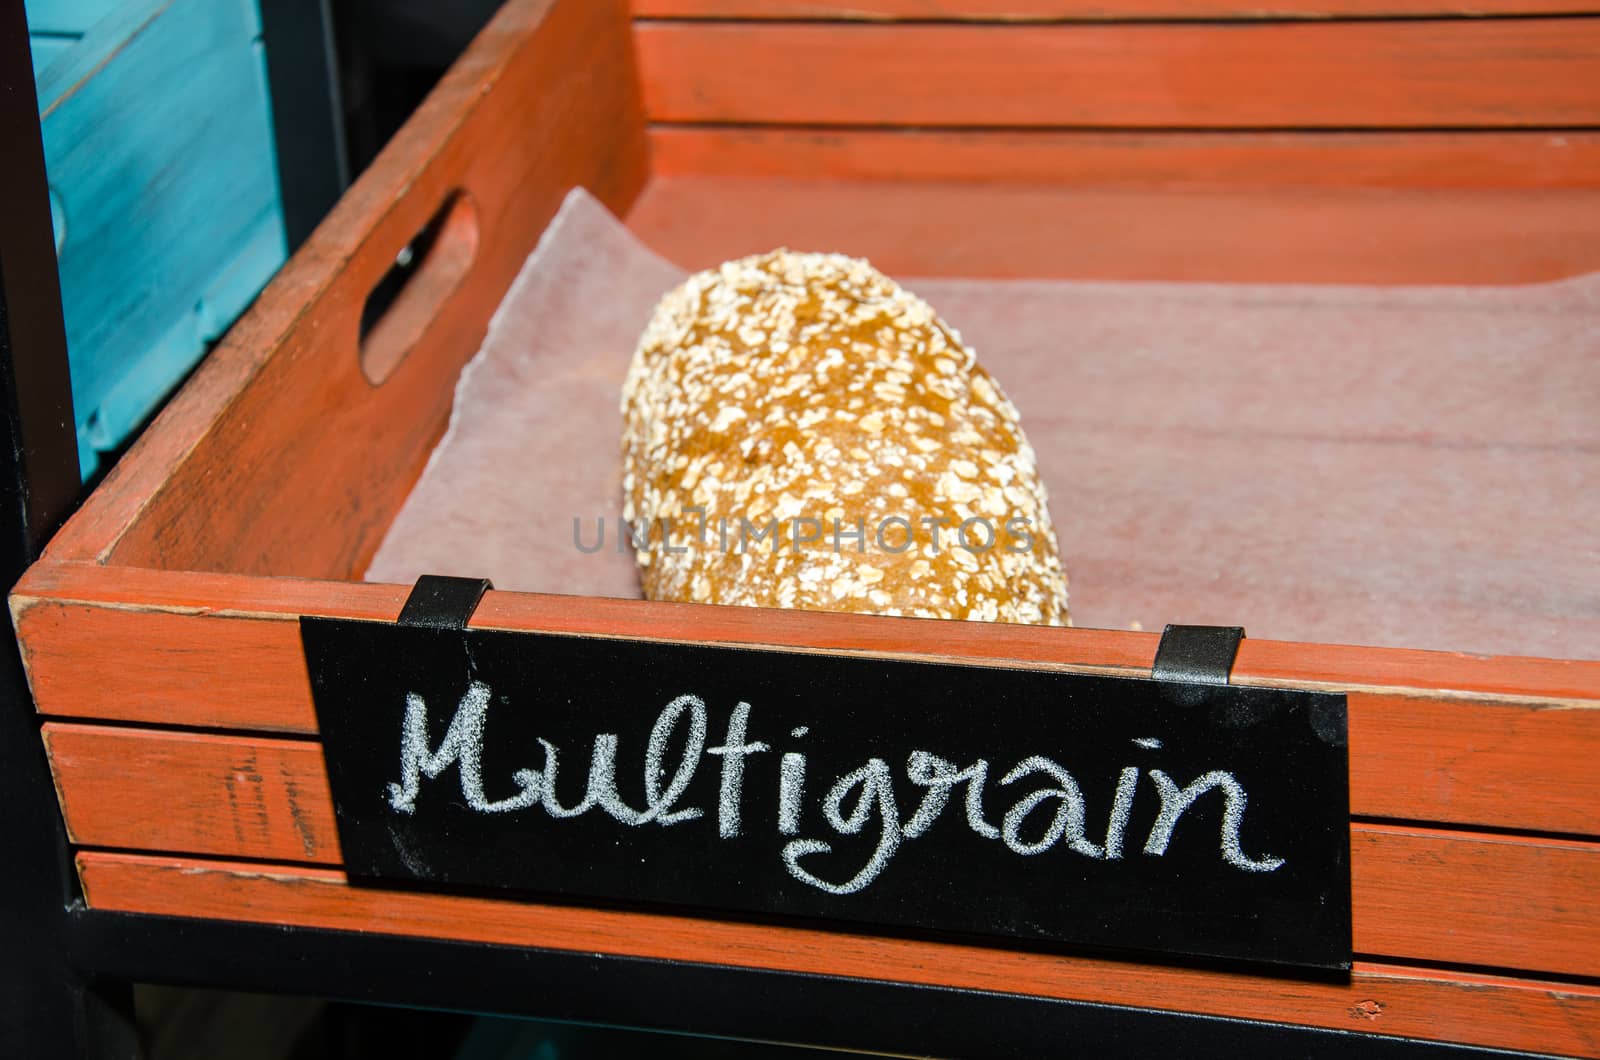 Mulitigrain bread, Whole wheat bread, on wooden basket, made from flour.